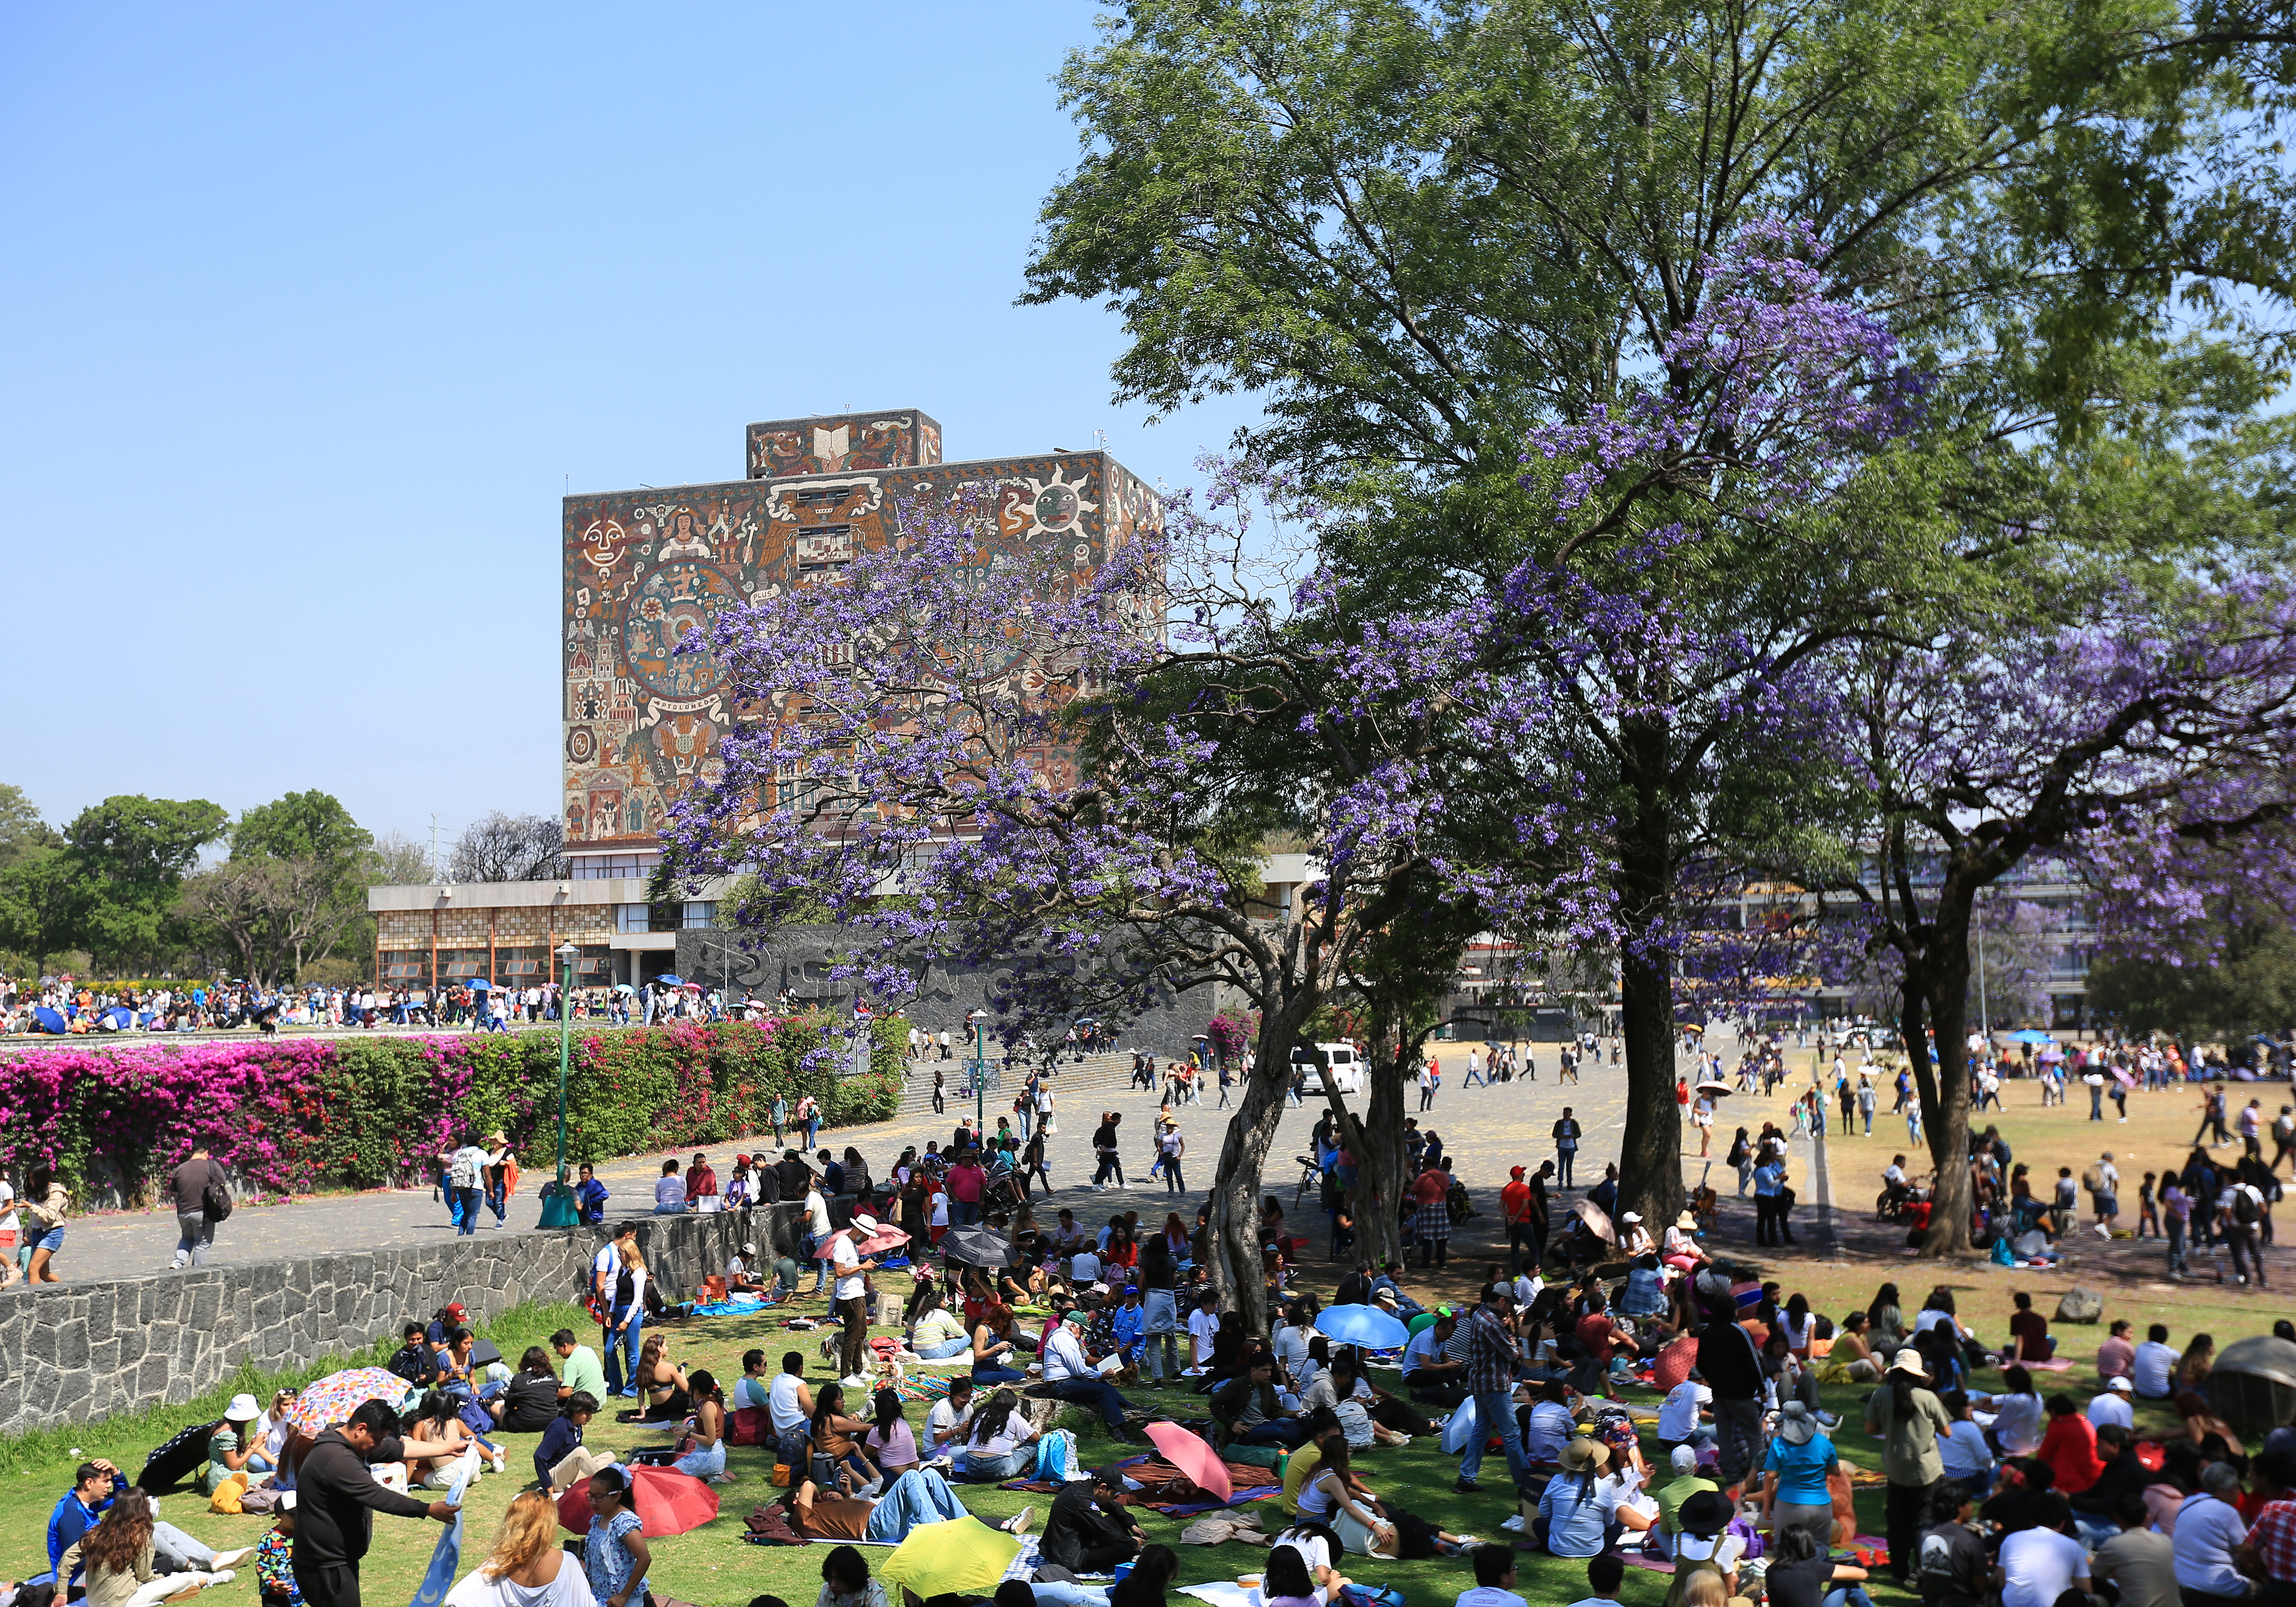 People gather in a park with blooming trees and a large building with mosaic in the background